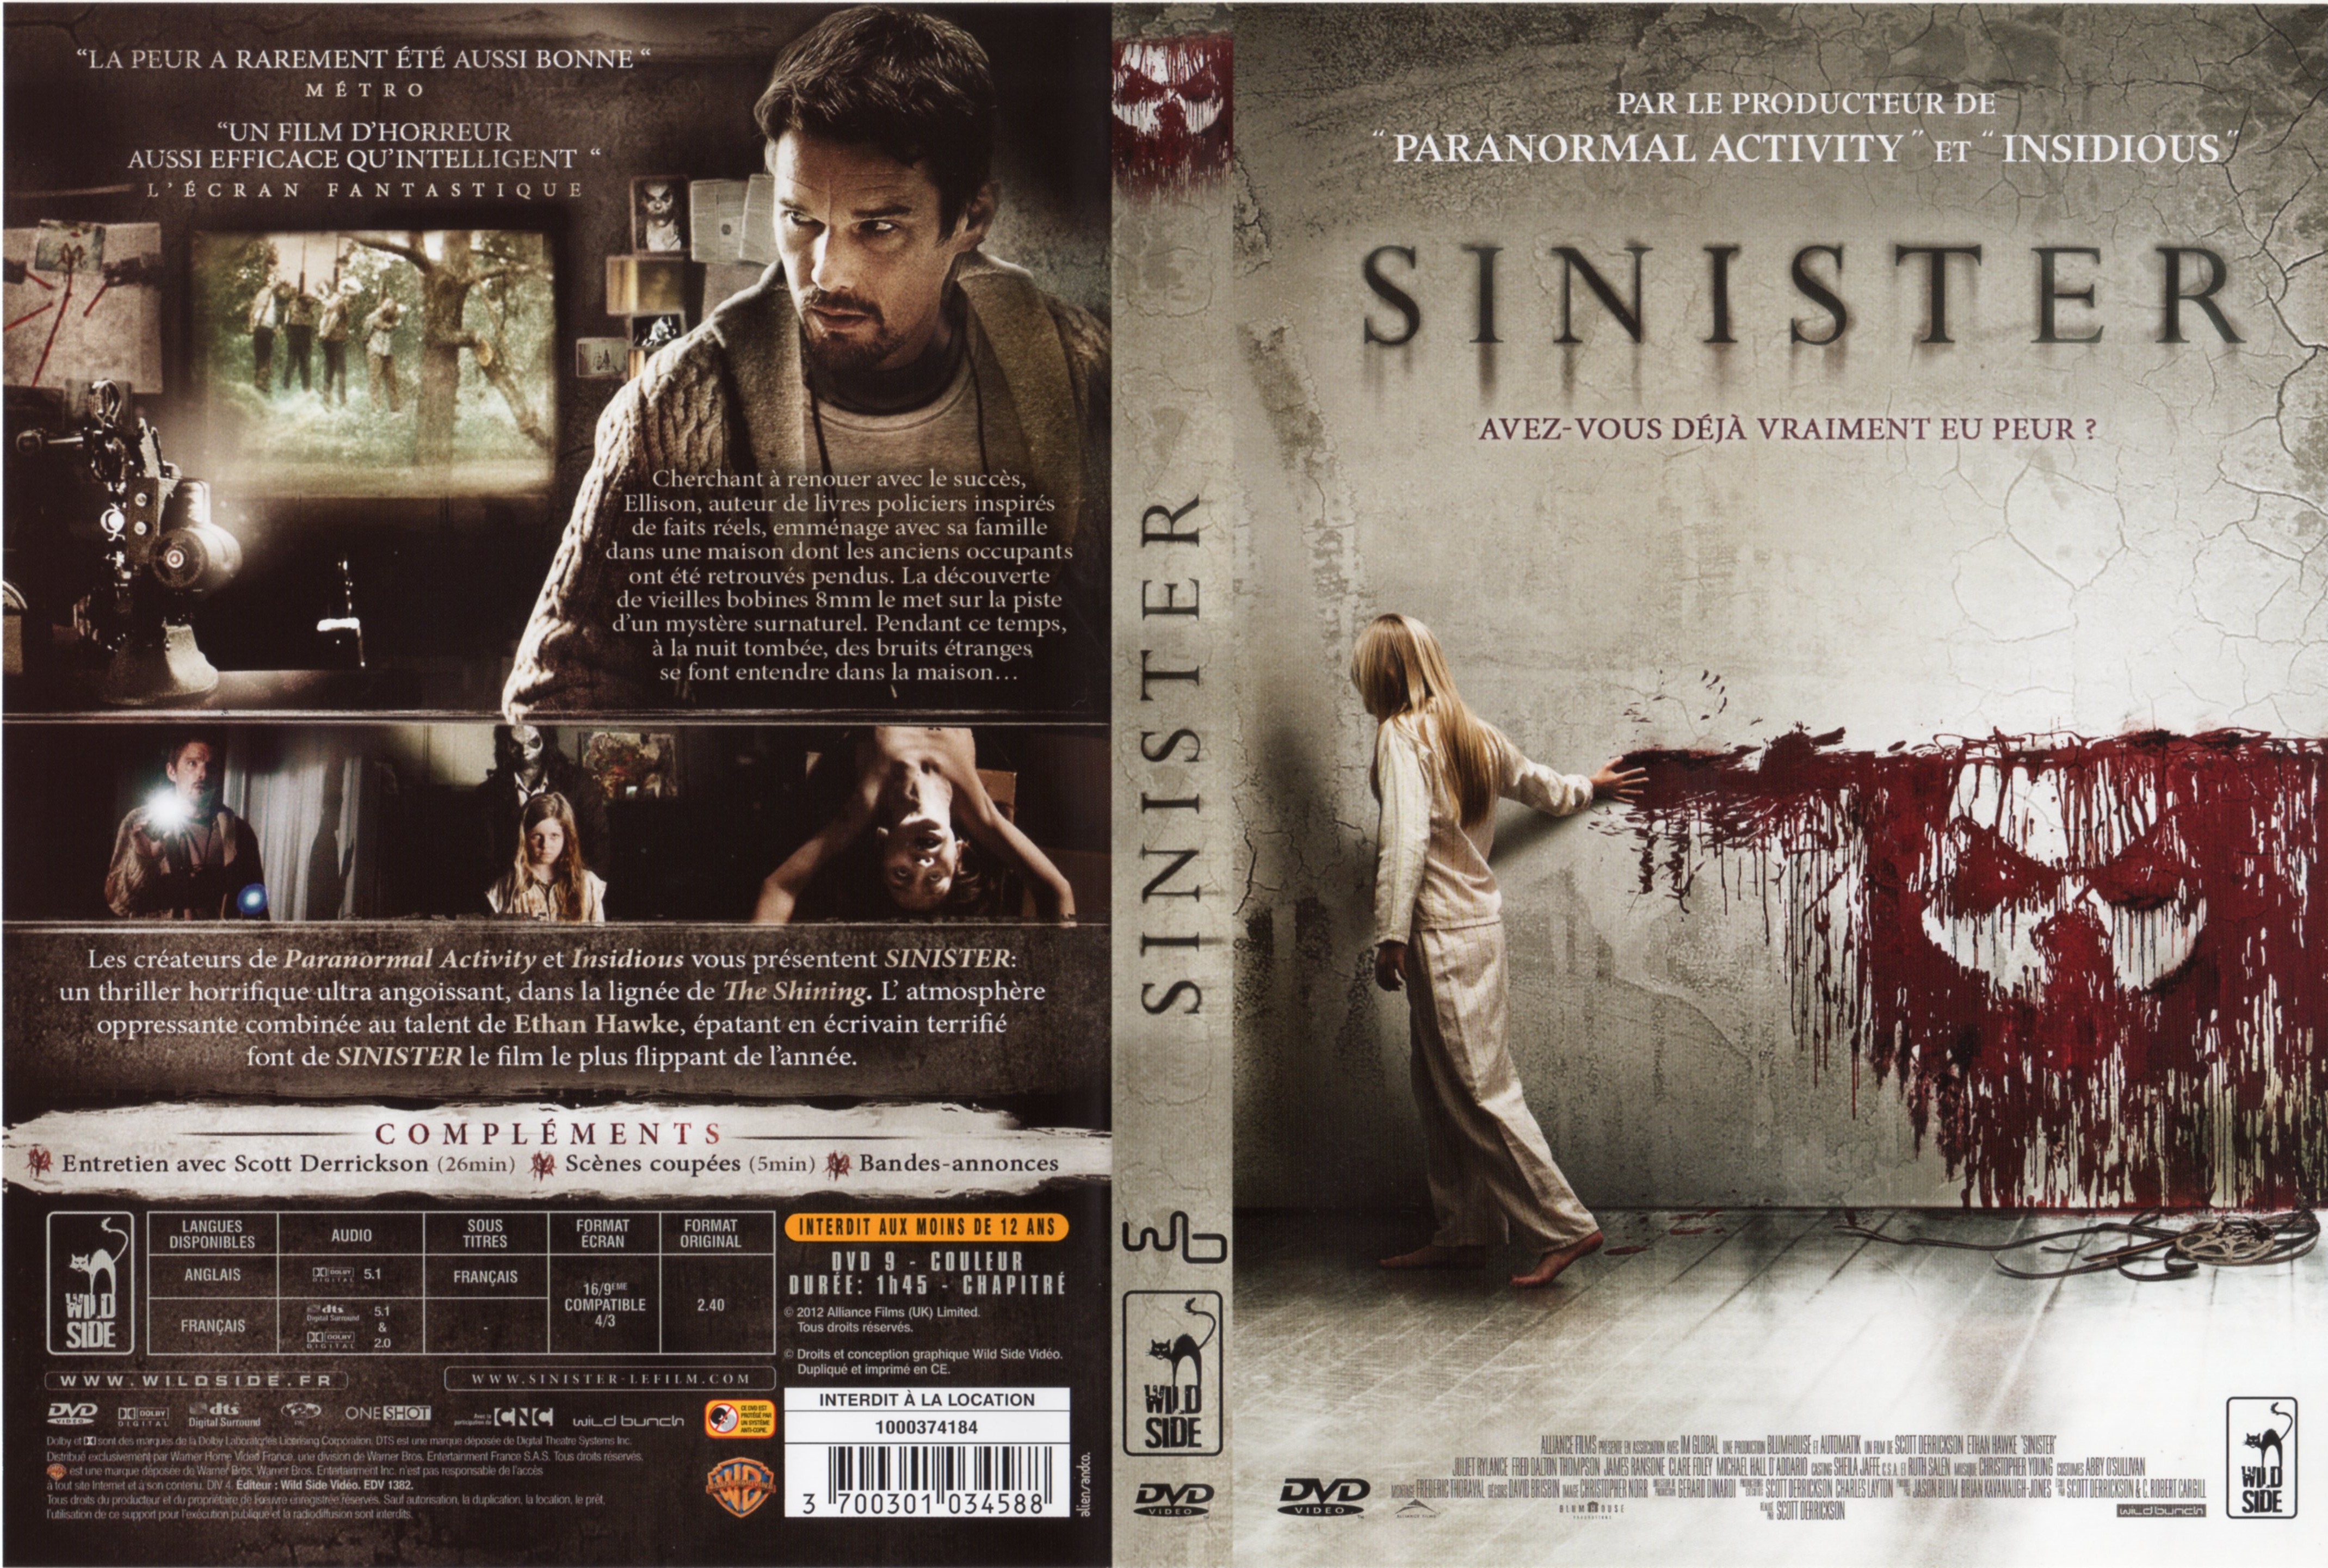 Jaquette DVD Sinister